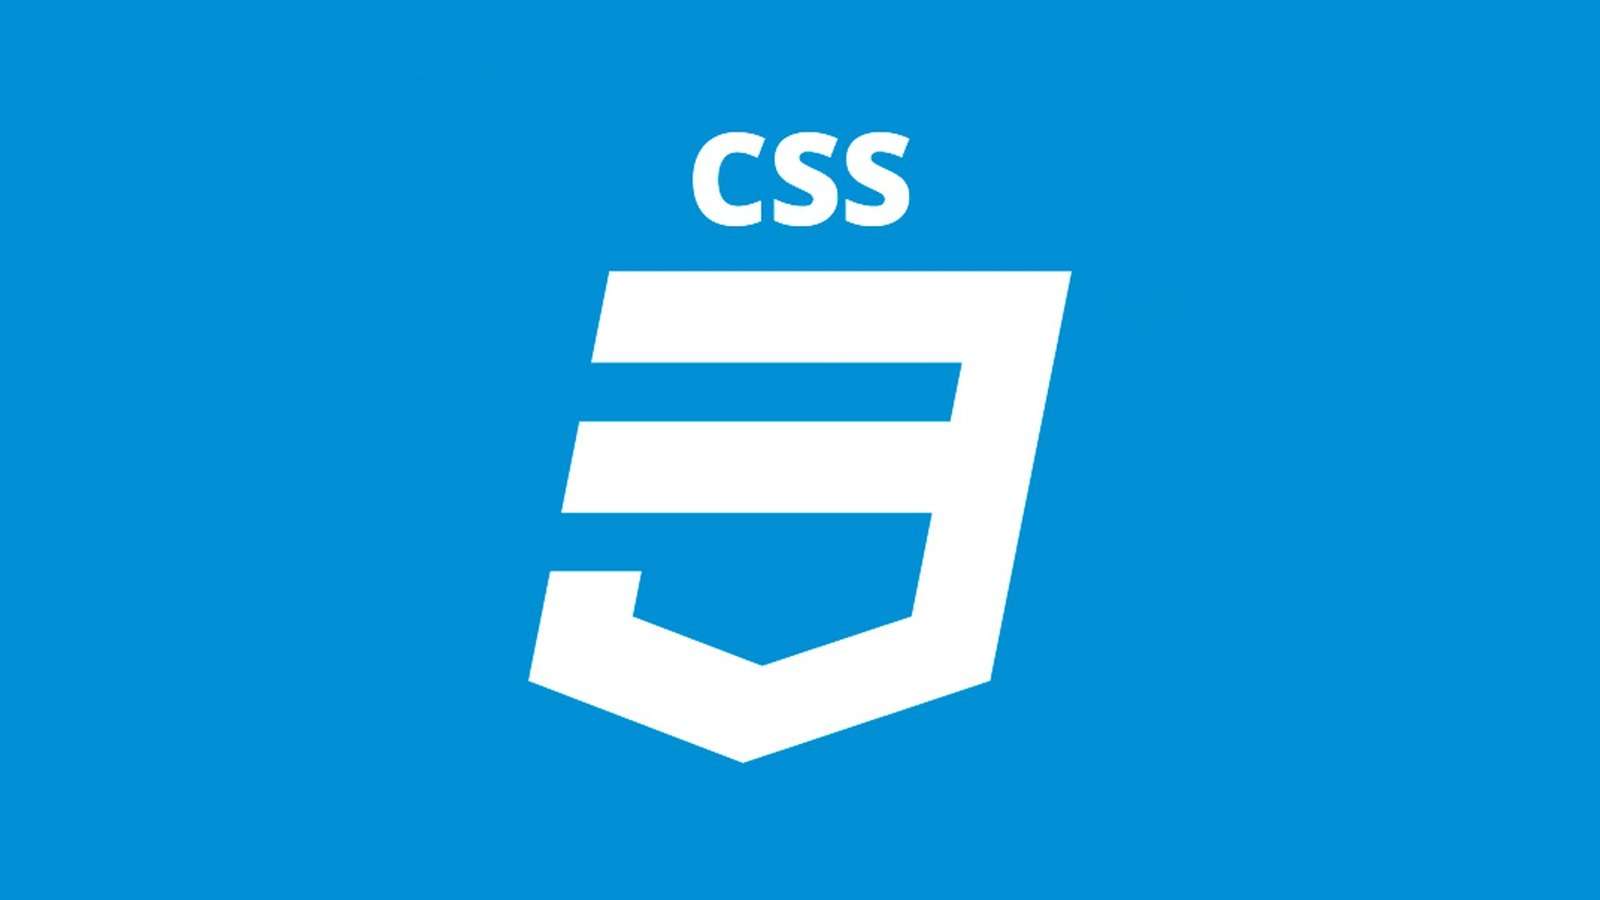 How To Put An Image Below Another Image In Css